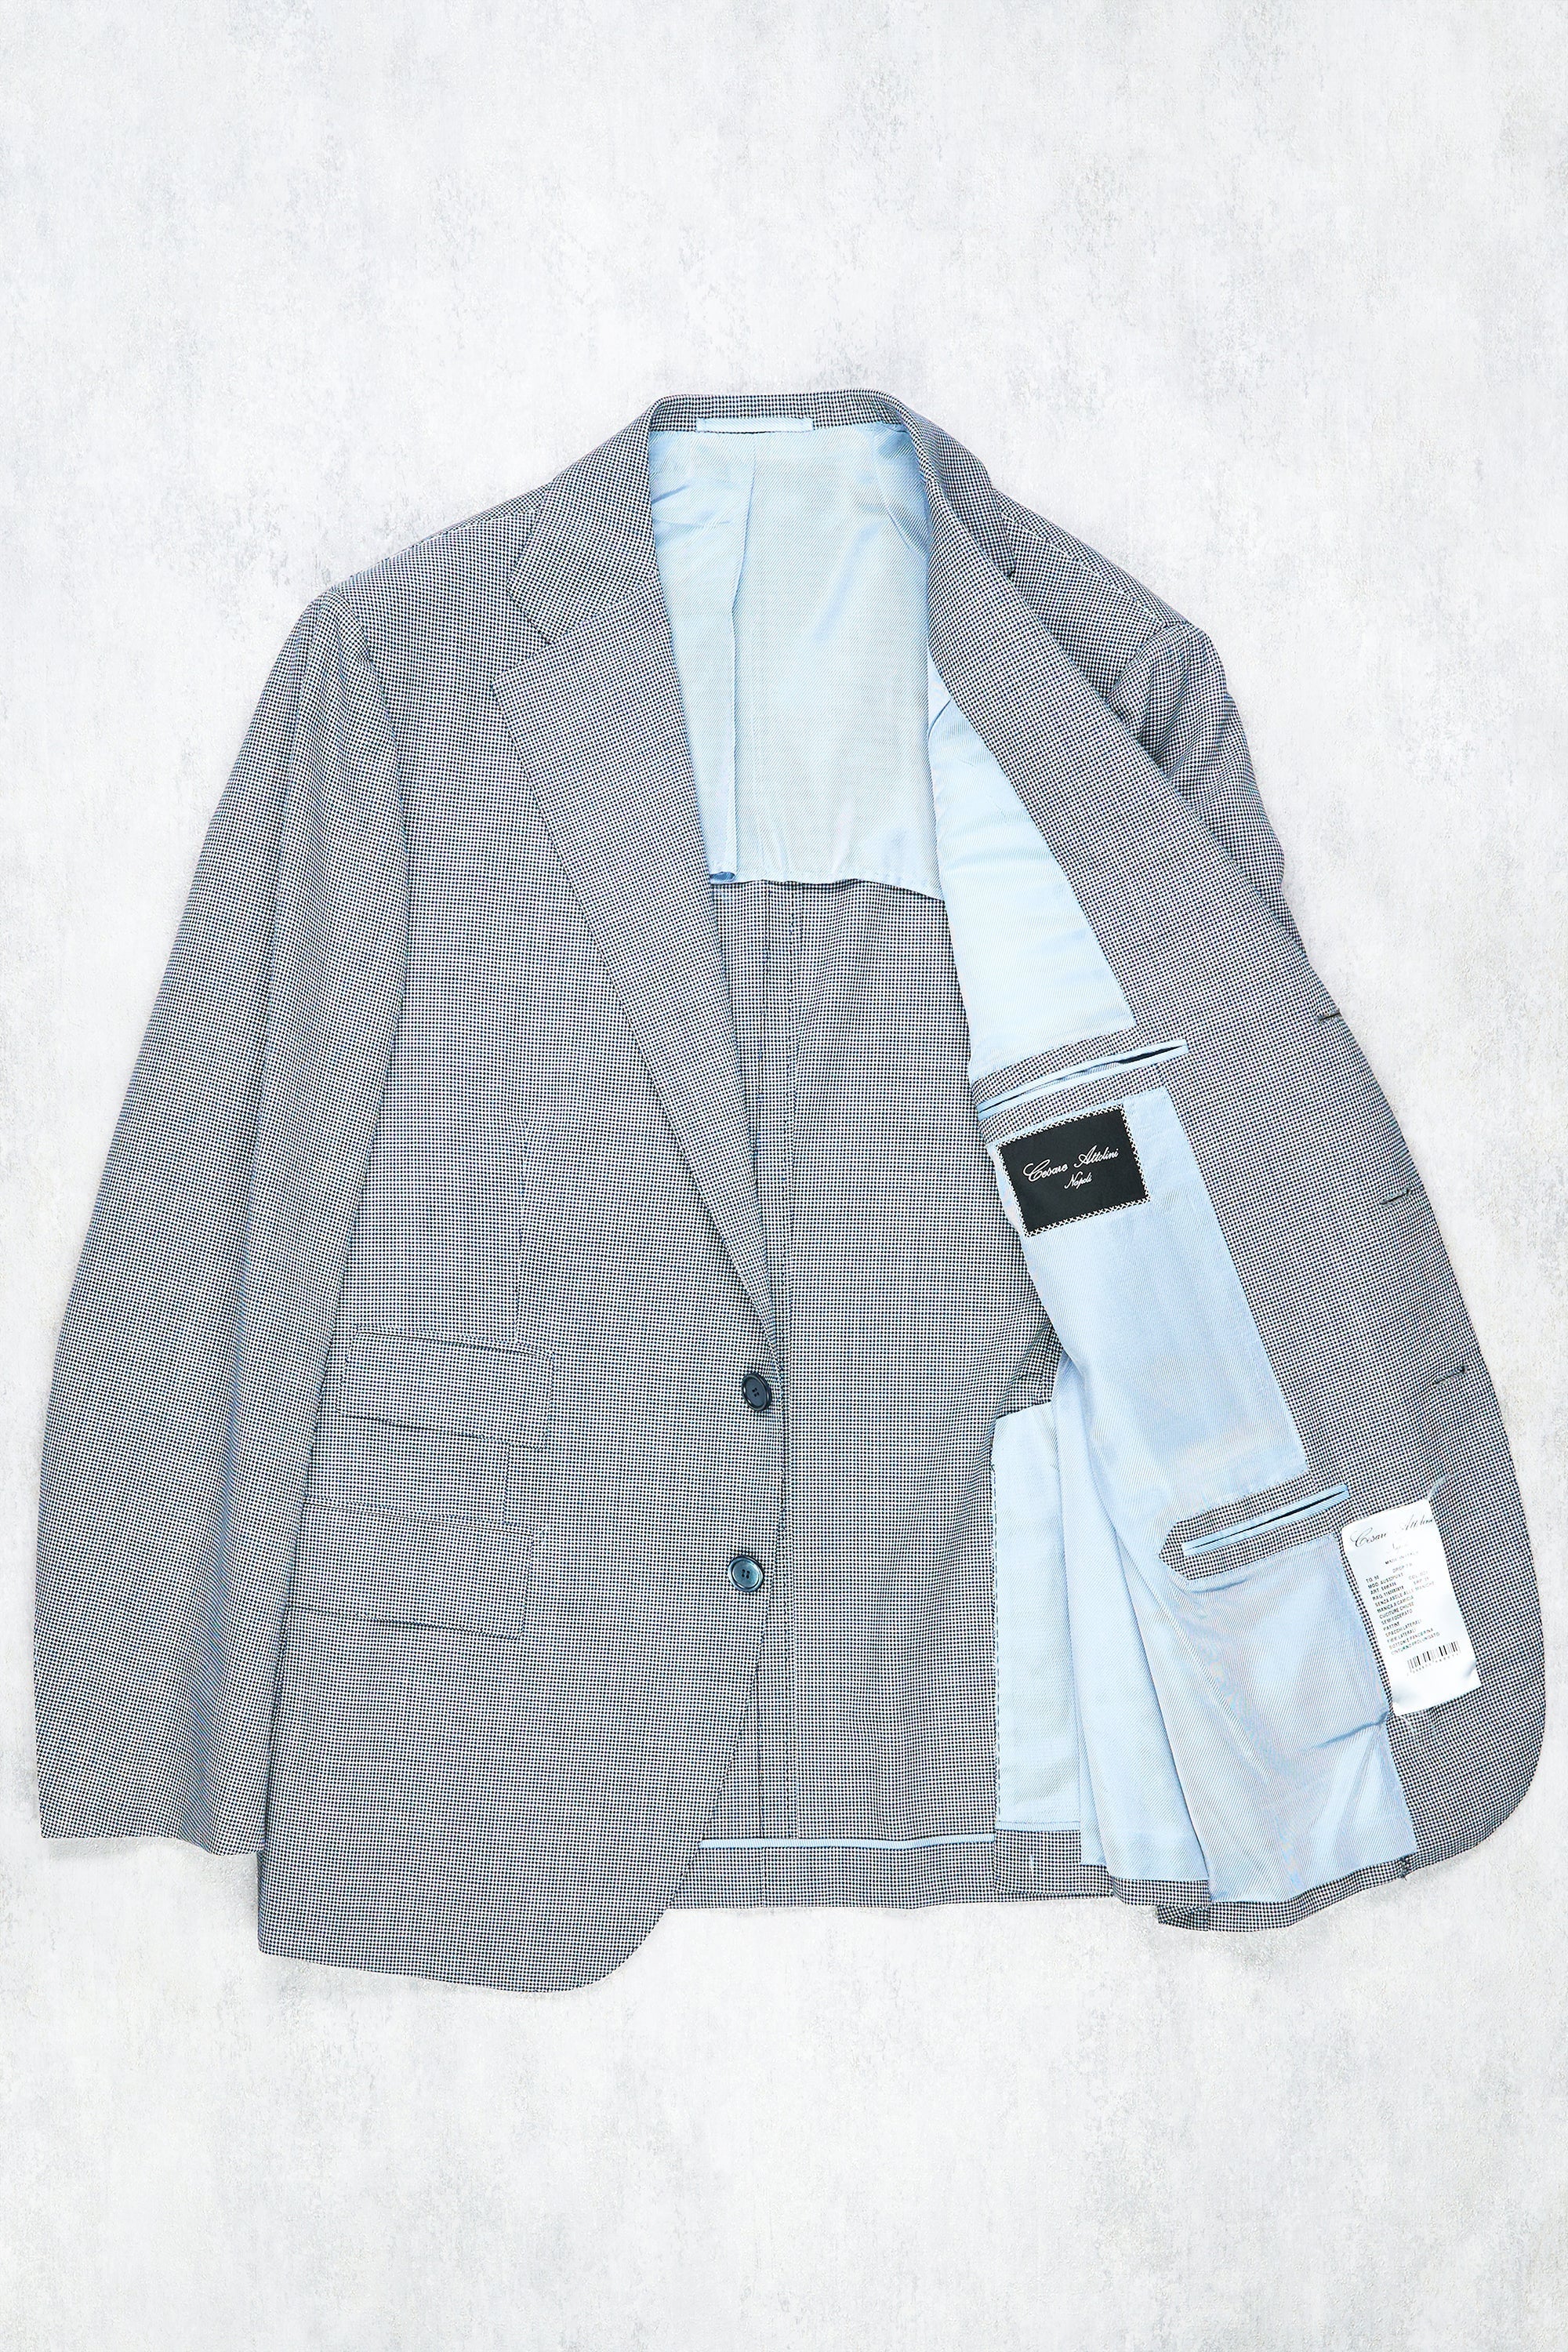 Cesare Attolini Blue/White Mini Houndstooth Wool Suit